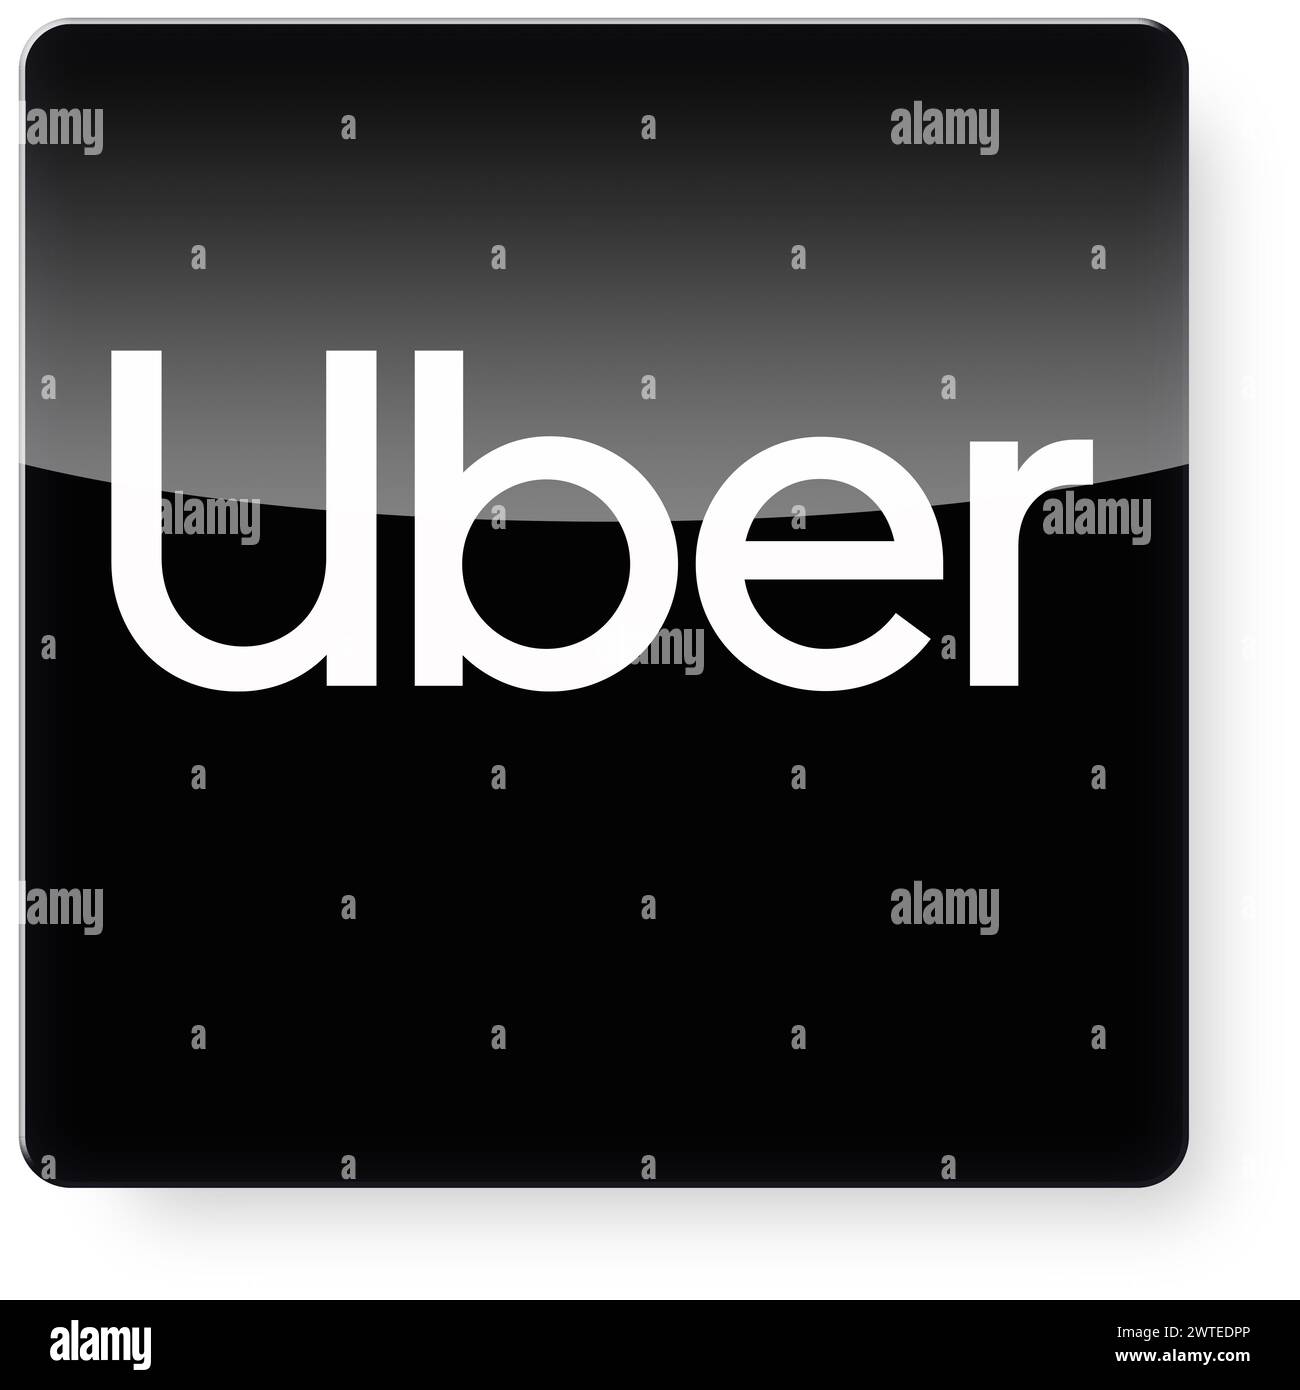 Uber logo as an app icon. Clipping path included. Stock Photo